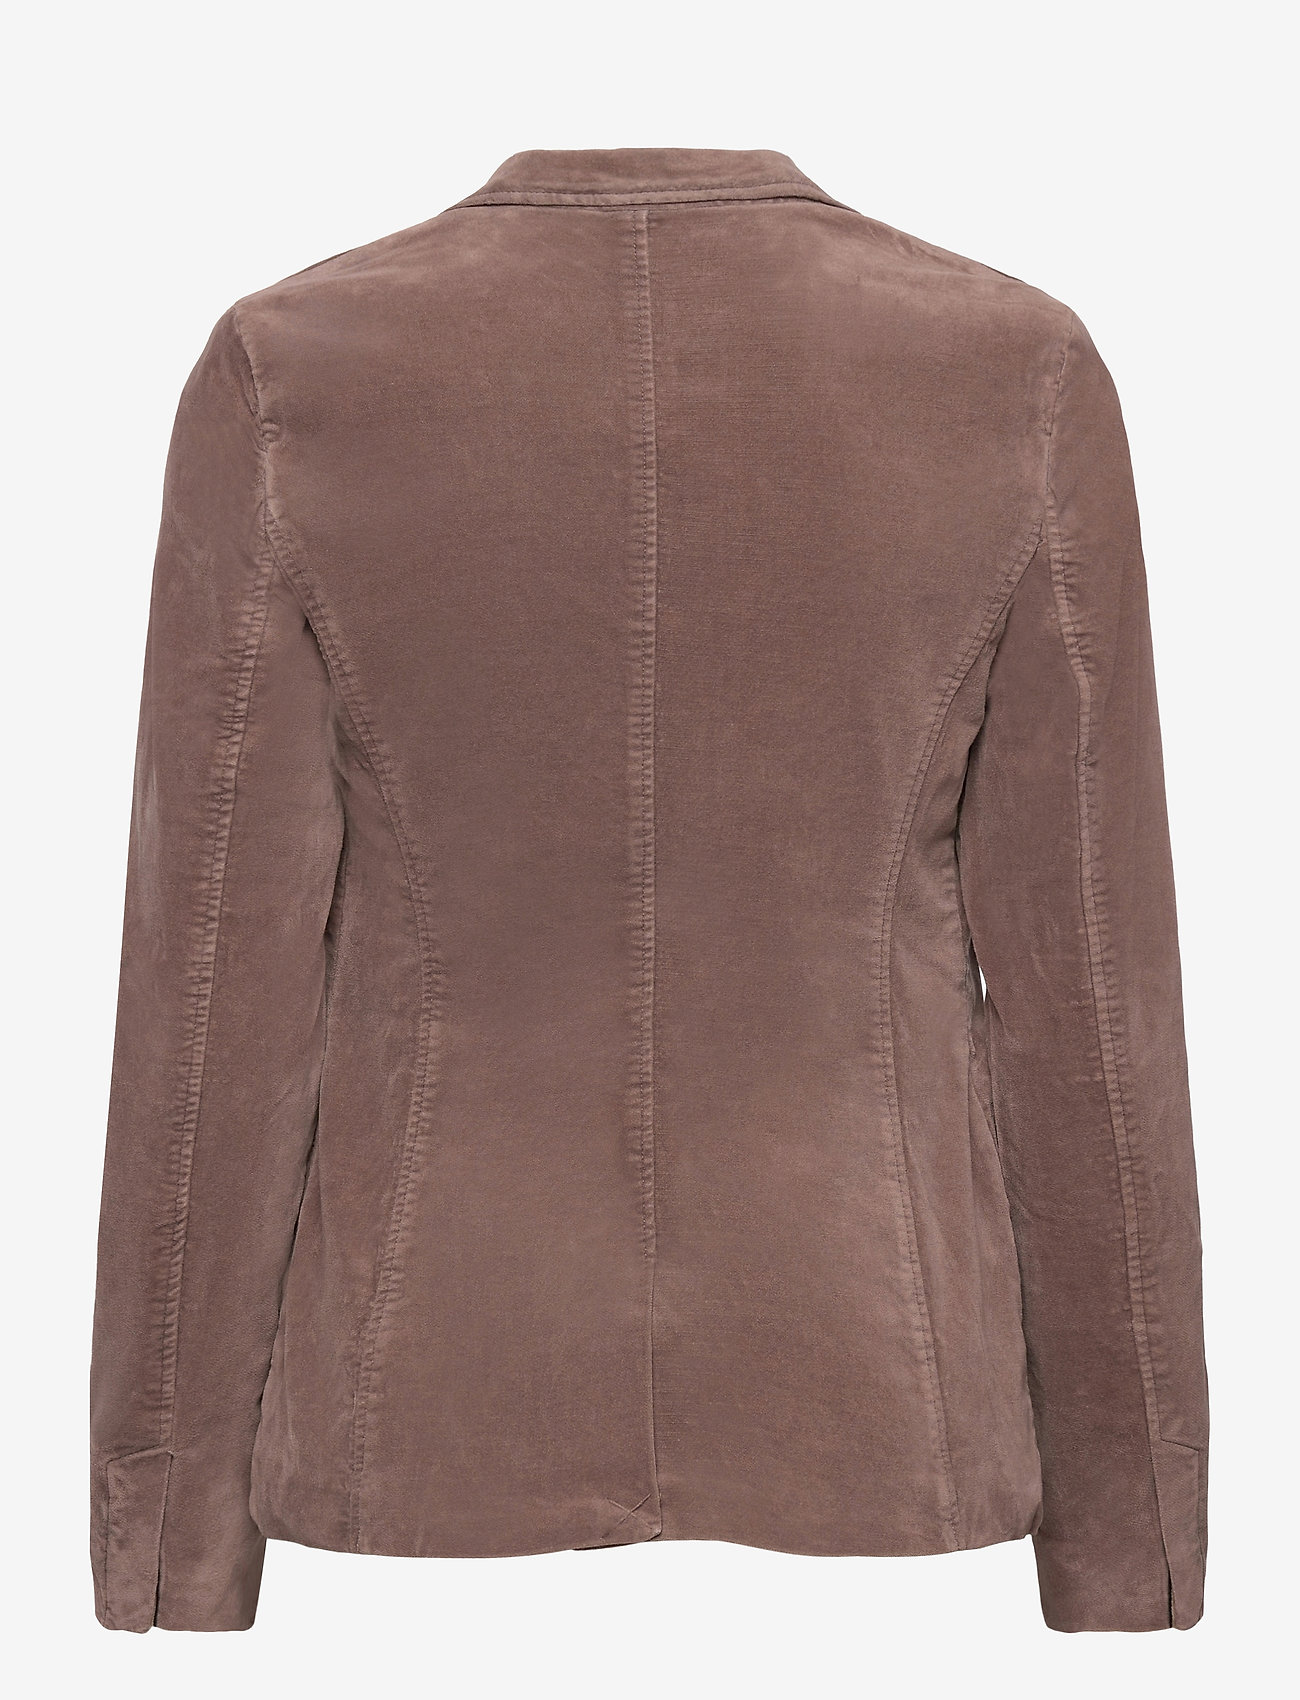 Esprit Casual - Women Blazers woven regular - party wear at outlet prices - light taupe - 1